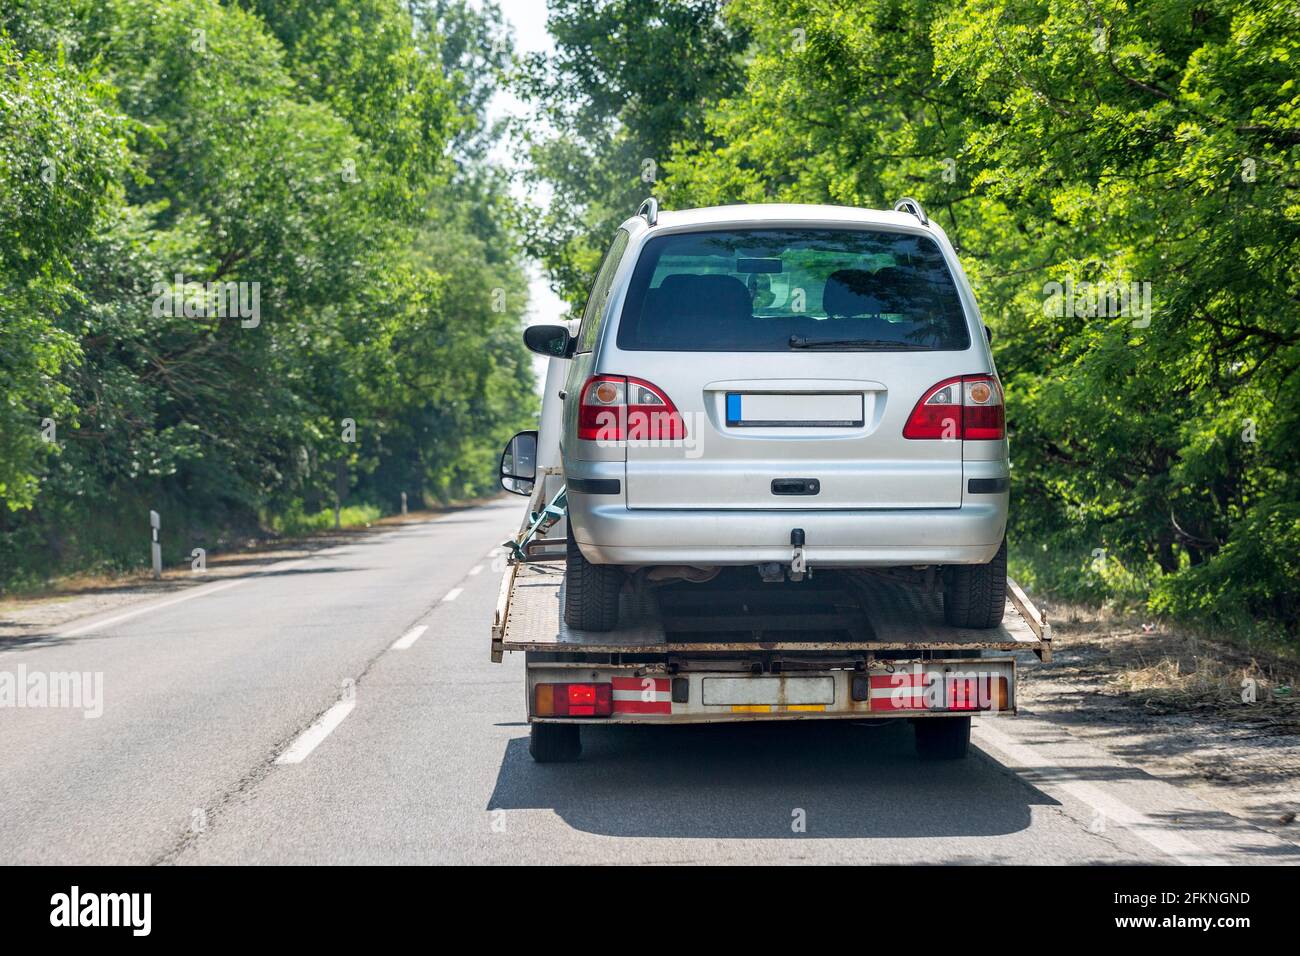 Truck transporter carrying car on the road. Back view. Bright green trees along road Stock Photo